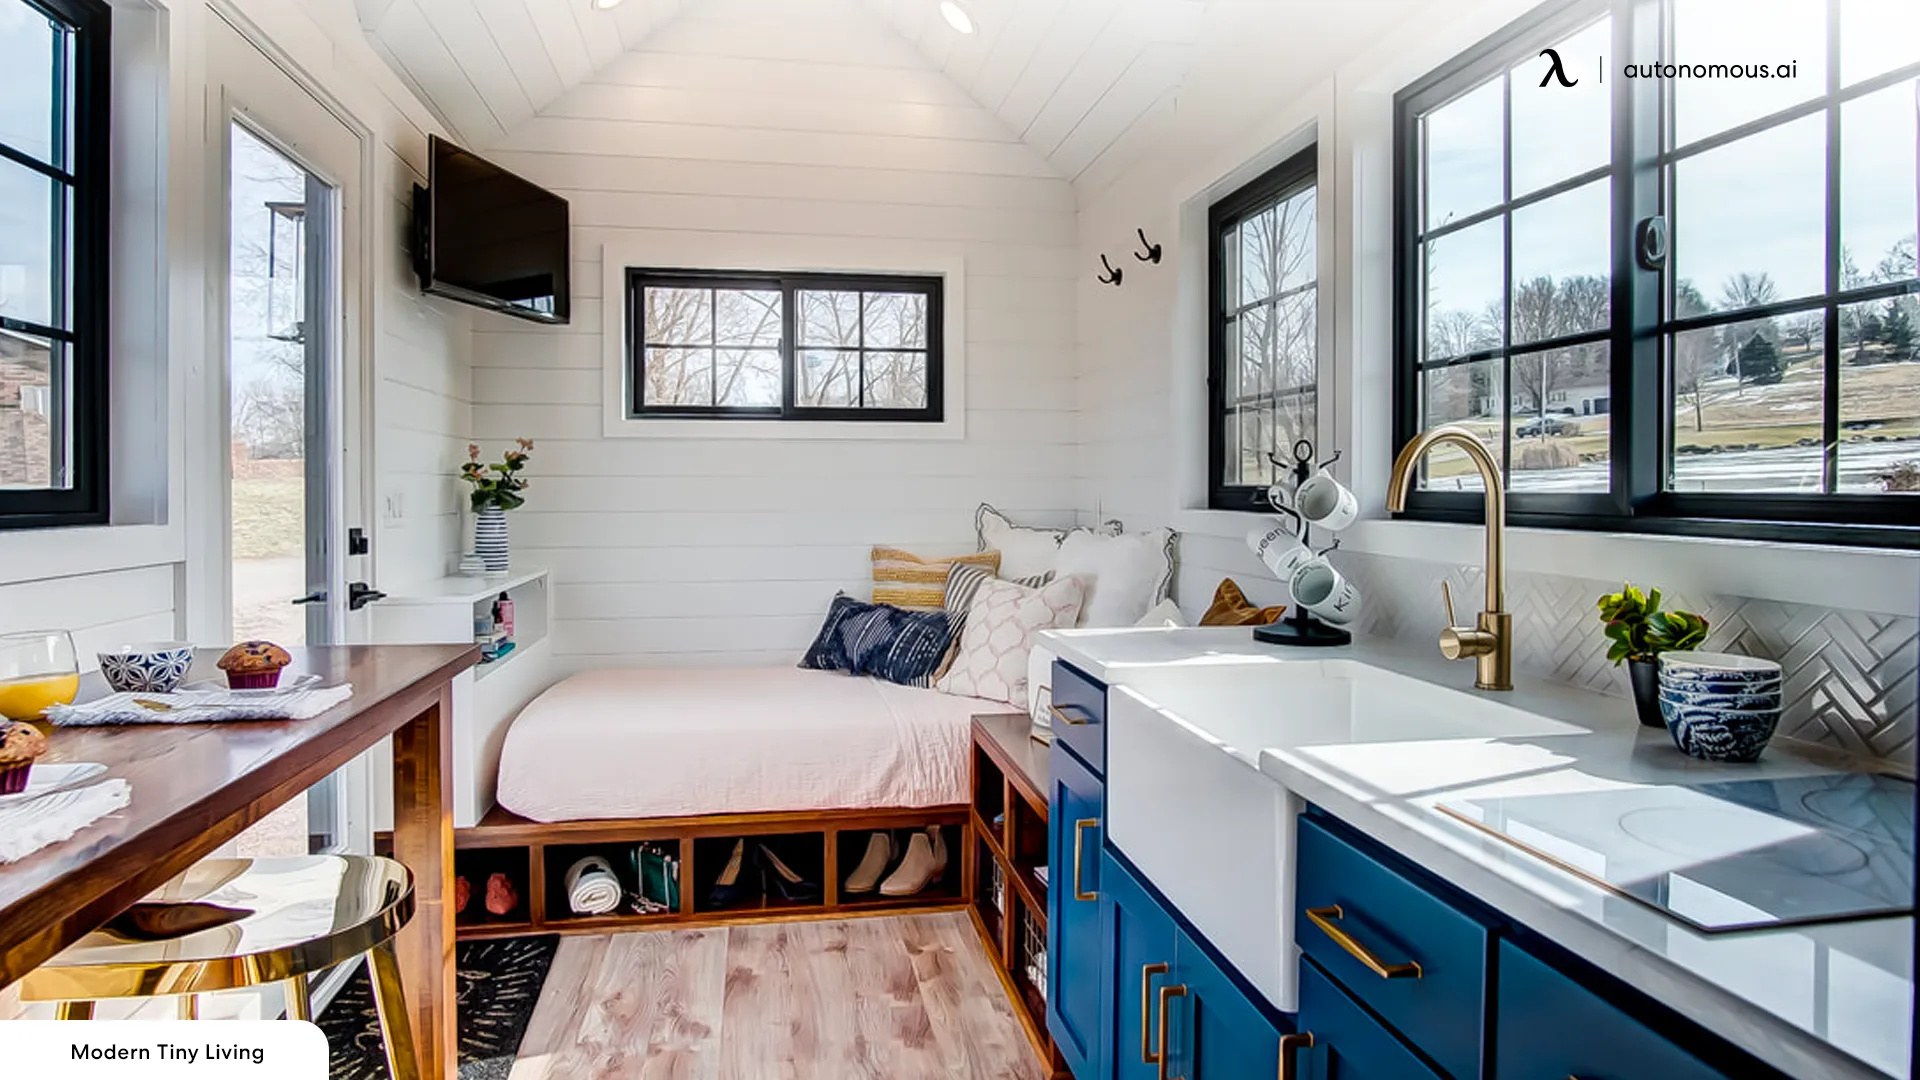 What is No Loft Tiny House?